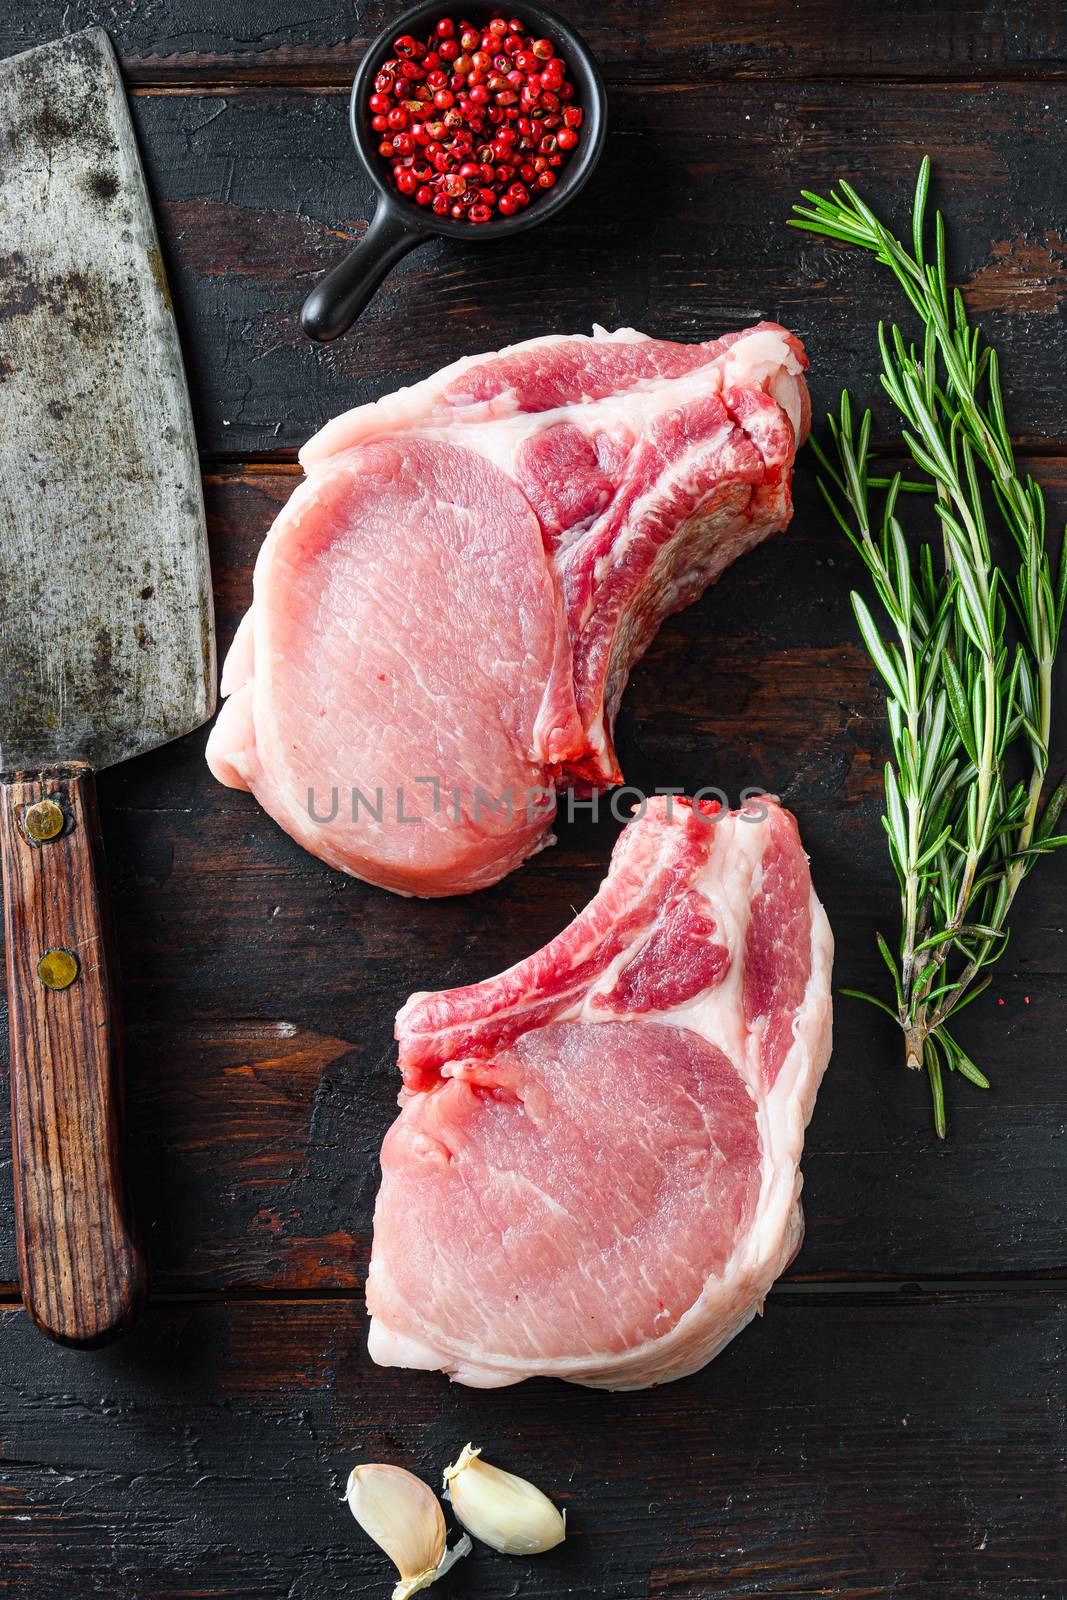 Organic bio Pork steaks, fillets for grilling, baking or frying, Fith butcher cleaver ower dark wood planks. Overhead view by Ilianesolenyi